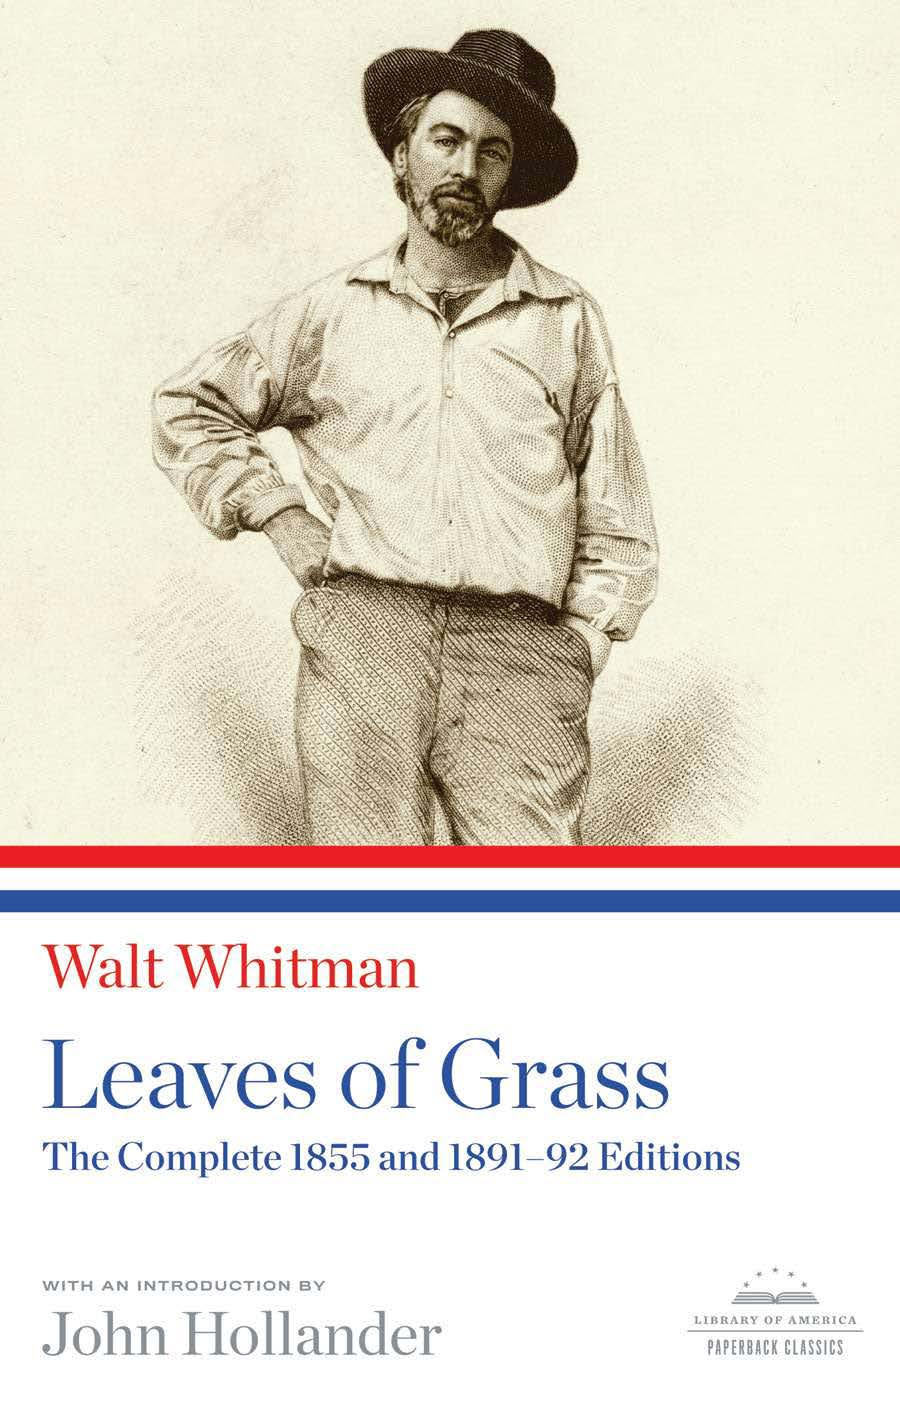 Leaves of Grass: The Complete 1855 and1891-92 Editions